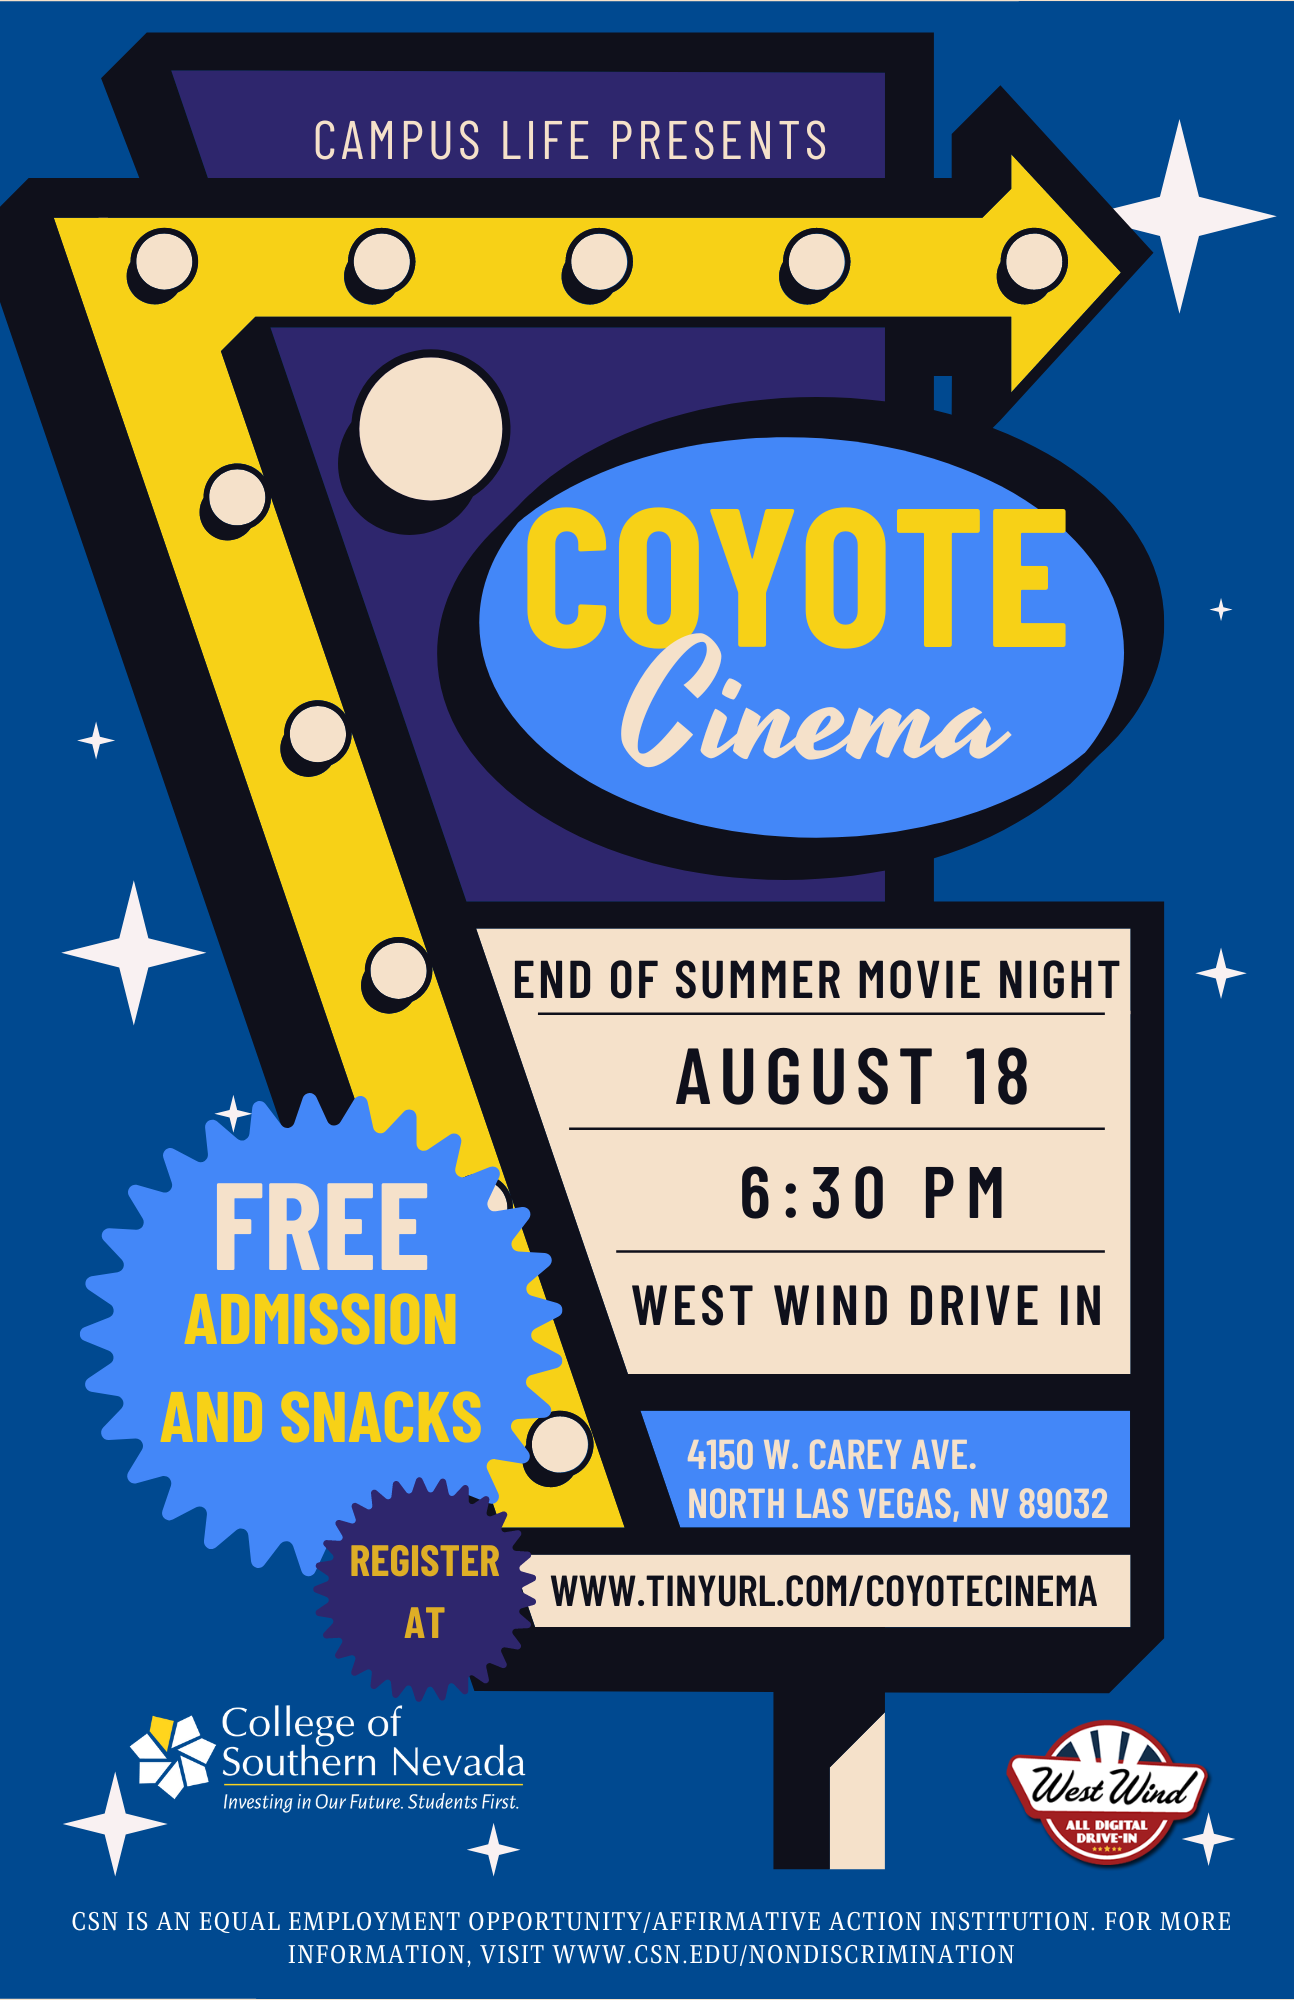 Event flyer for Coyote Cinema August 18, 2022